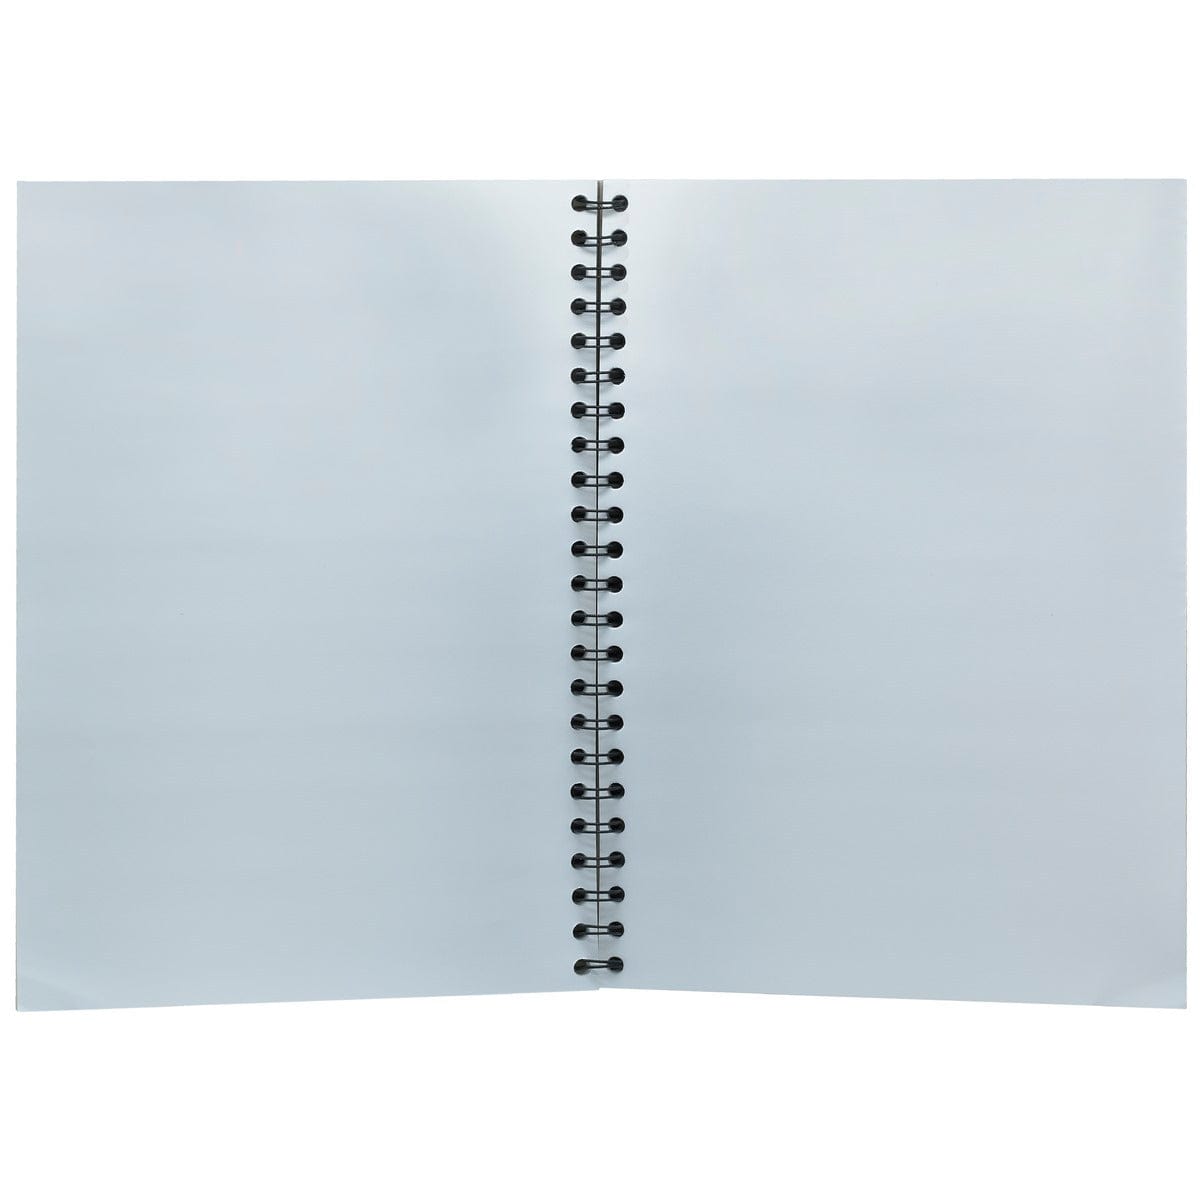 jags-mumbai Notebooks & Diaries Jags Unruled Notebook Wiro 192Sheet 96Pages 80Gsm A4 JCCPA4